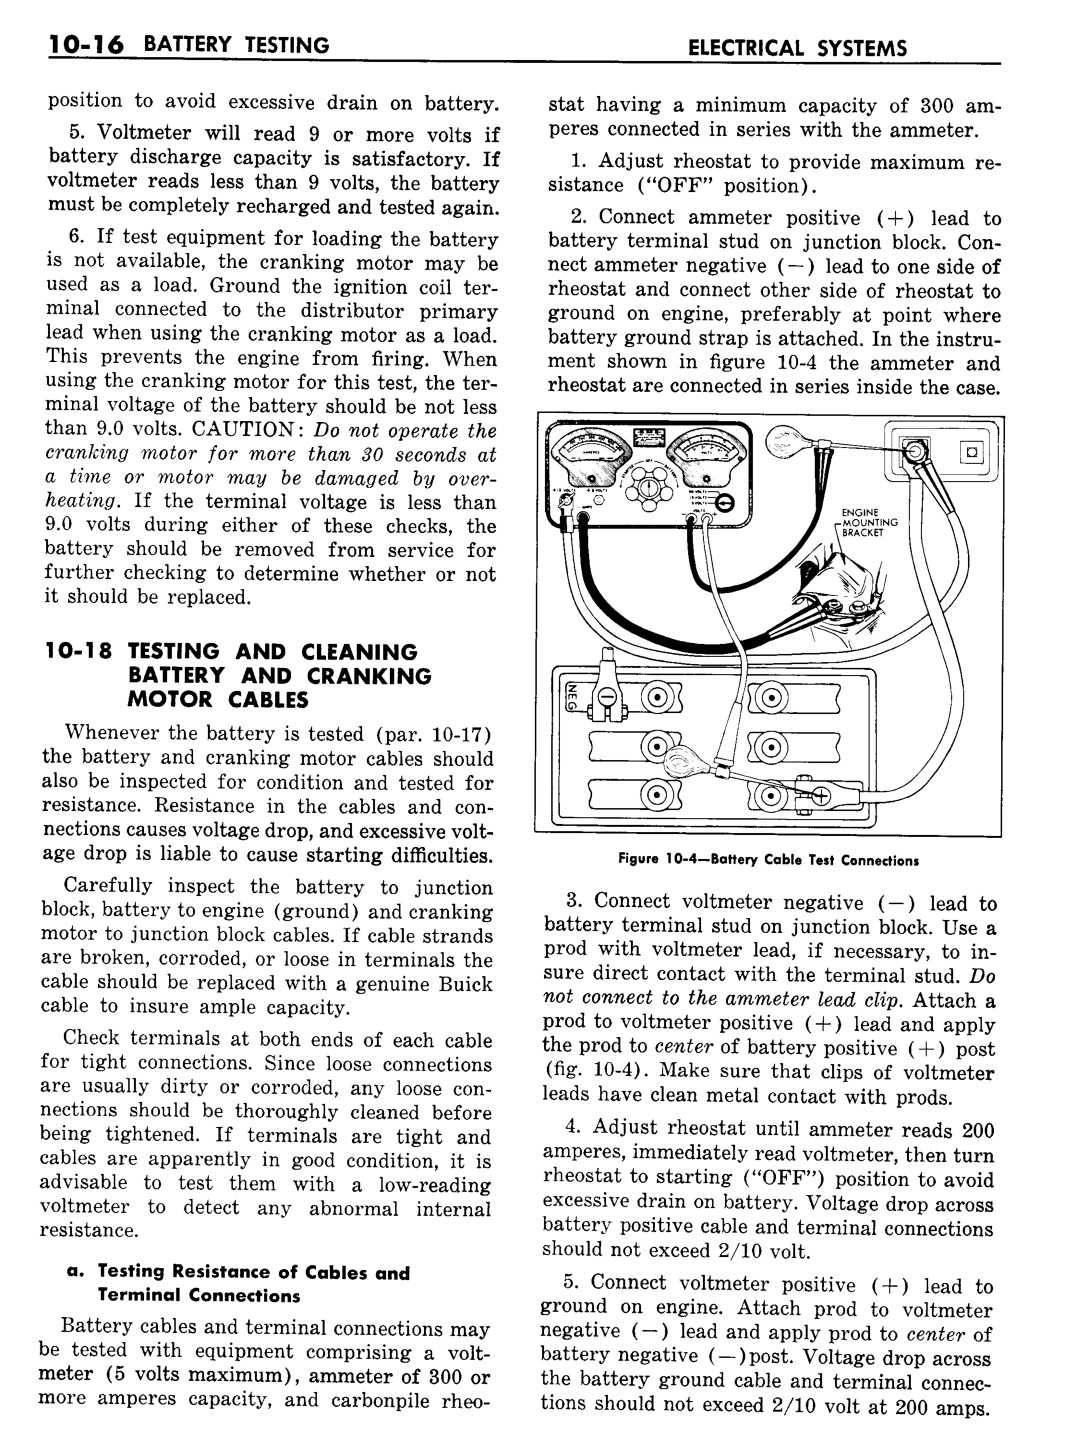 n_11 1957 Buick Shop Manual - Electrical Systems-016-016.jpg